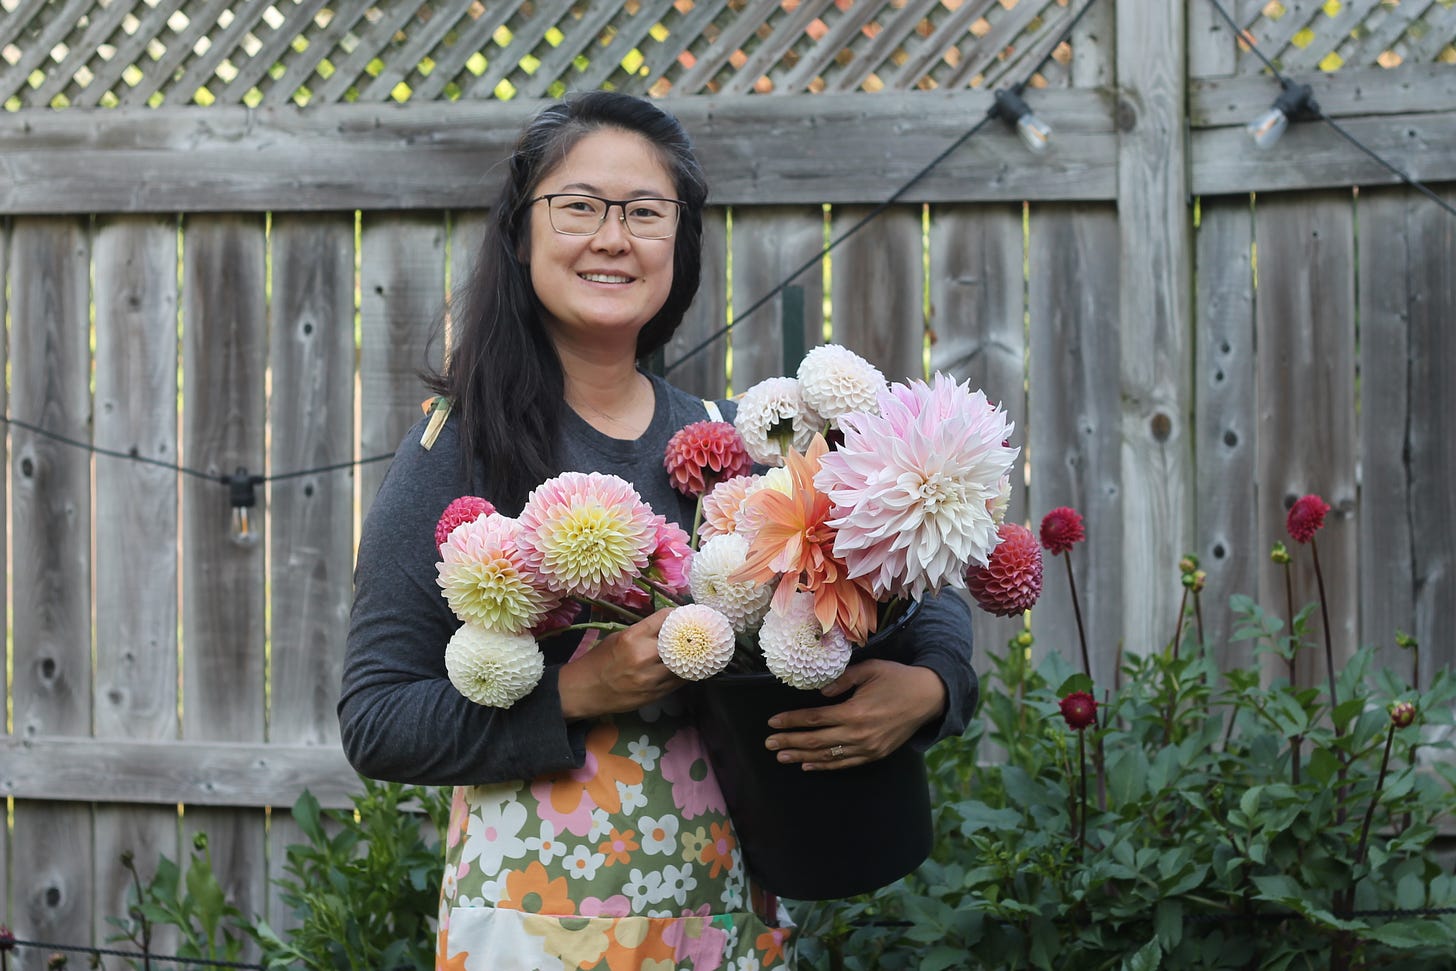 An Asian woman with long hair and glasses stands in front of a dahlia patch holding a bucket of dahlias. She is wearing a 70s floral romper.